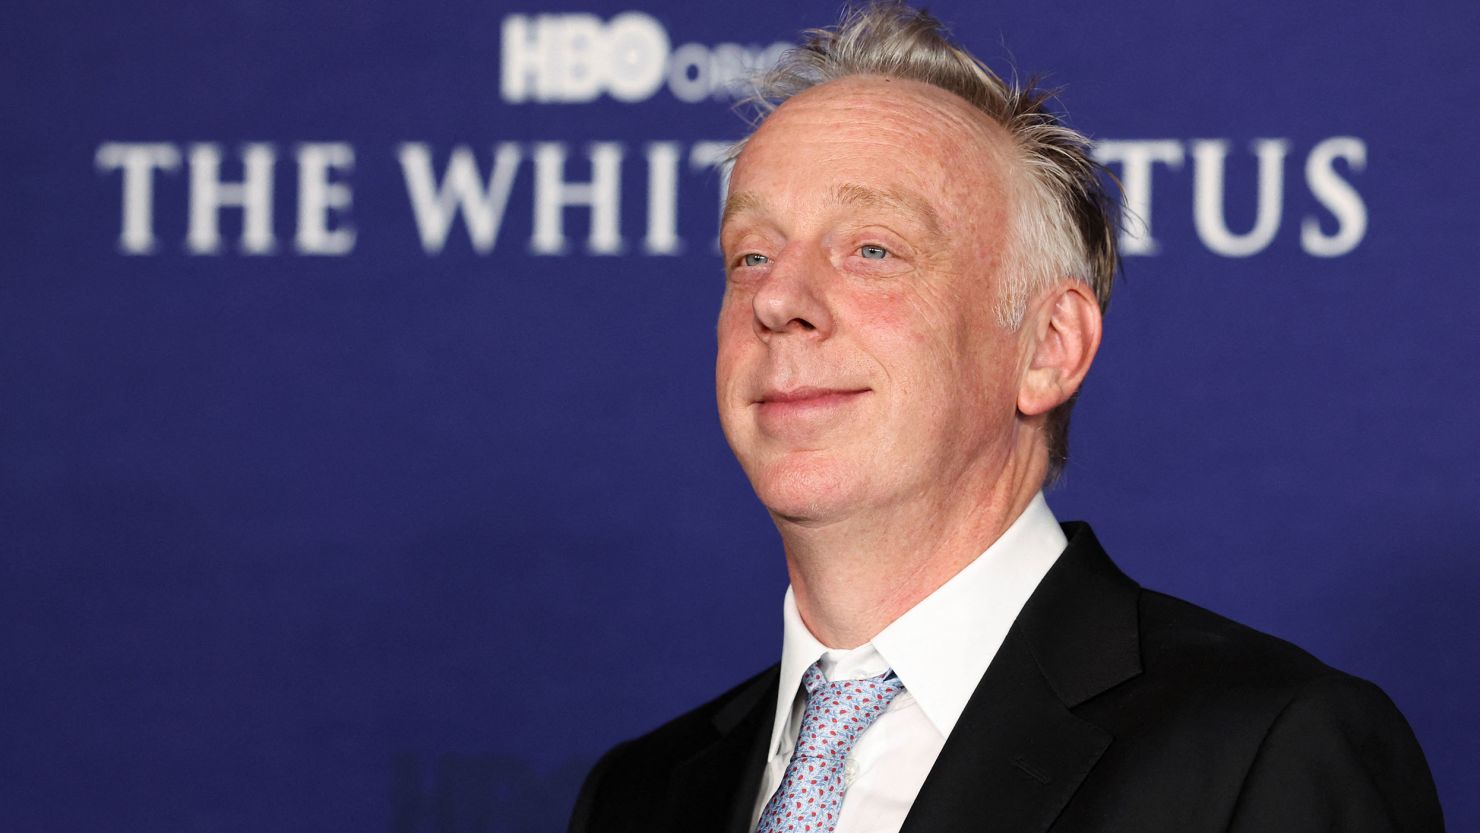 'White Lotus' creator Mike White, seen here at the premiere for Season 2 in Los Angeles in October, is dropping hints for what might come next for the acclaimed show.